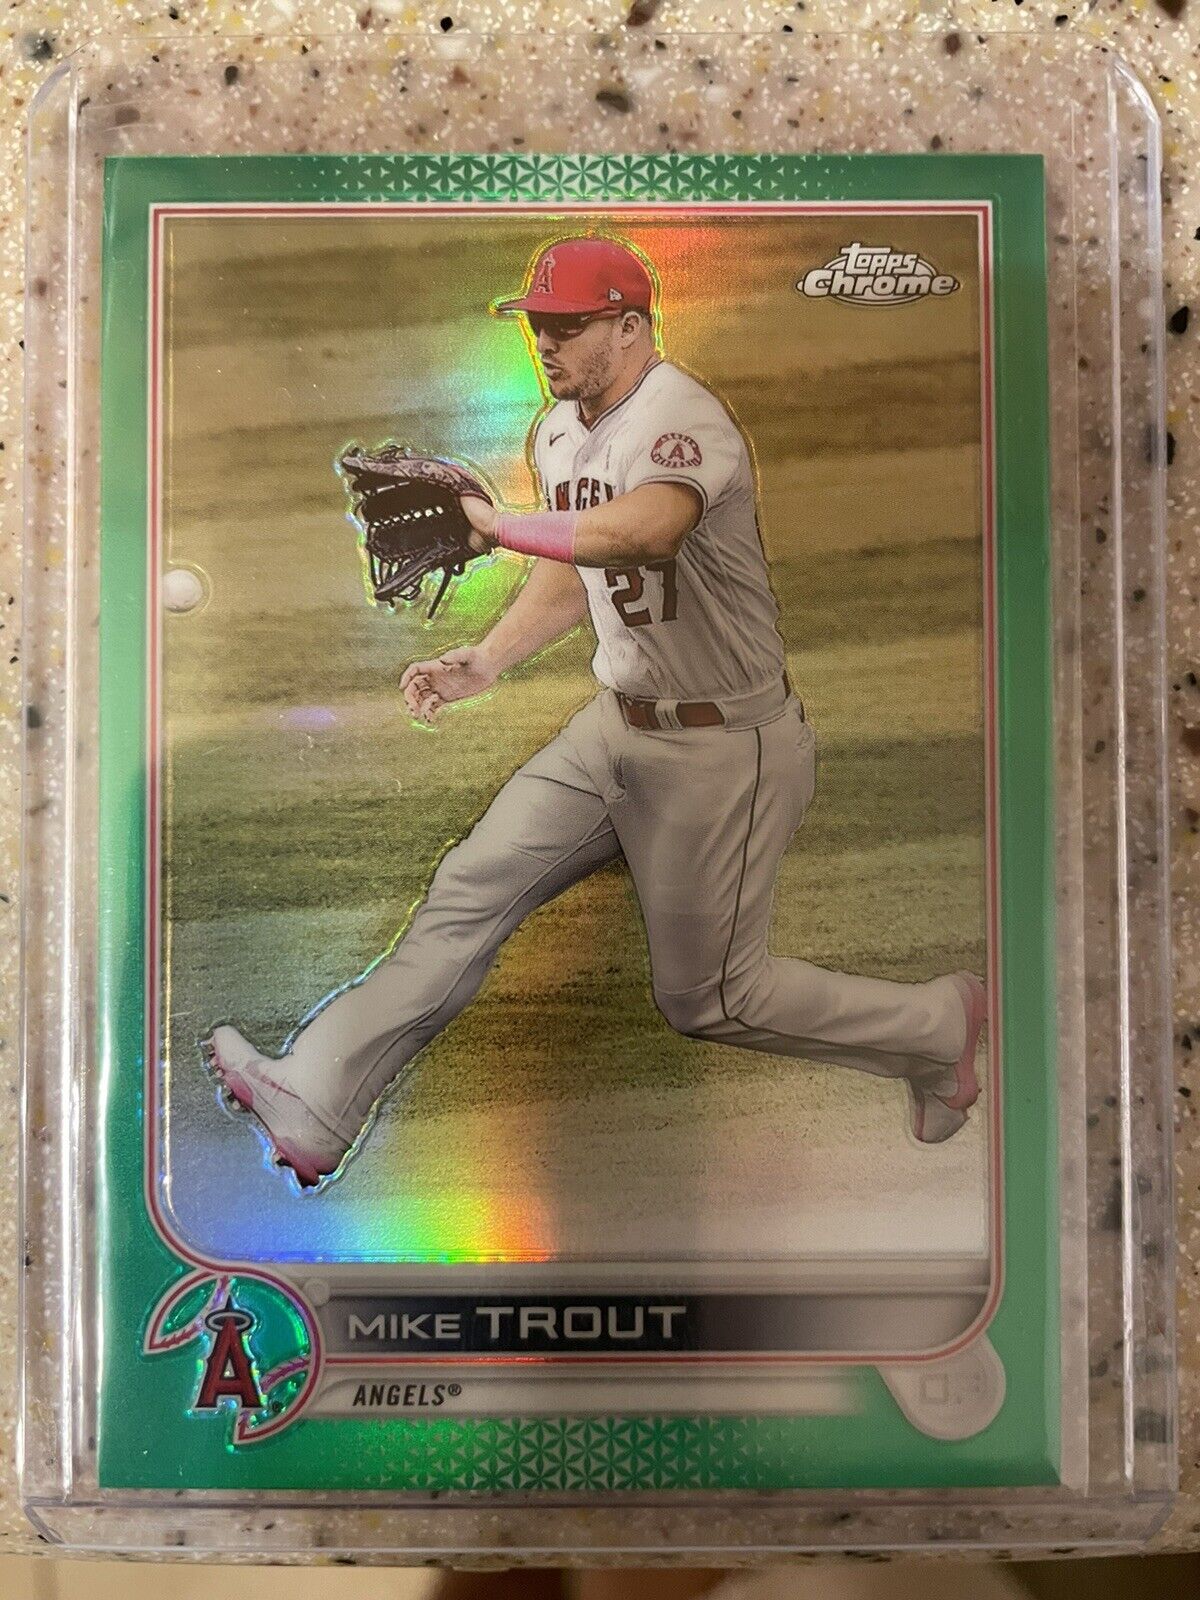 2022 Topps Chrome Mike Trout True Green Refractor 76/99 MINT 